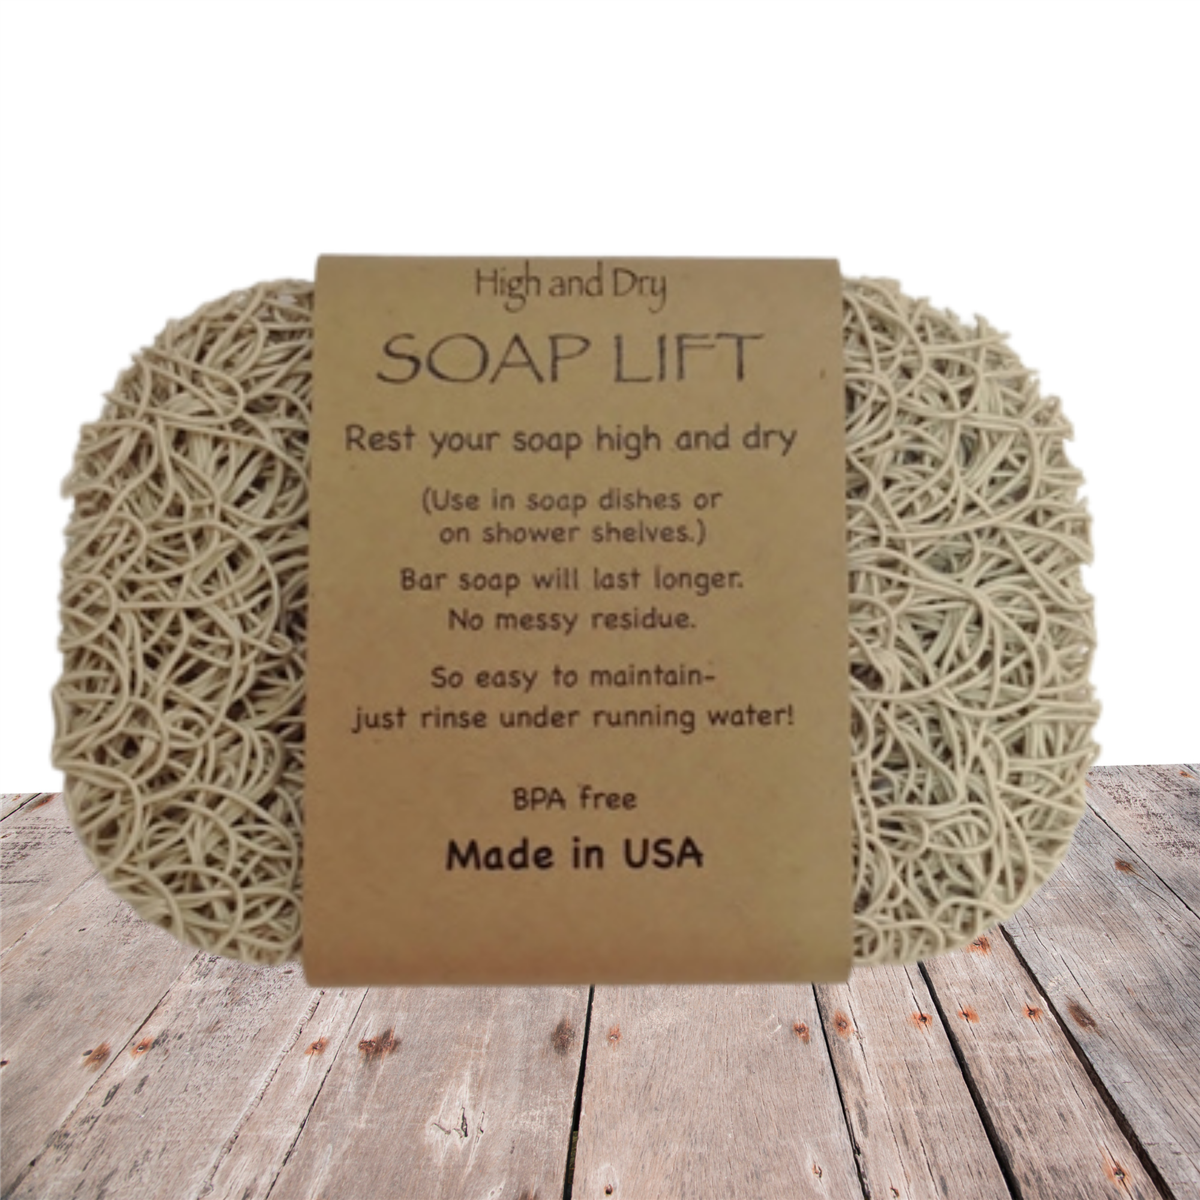 Soap lifts. Keeps soap high and dry. .Bar soap will last longer.